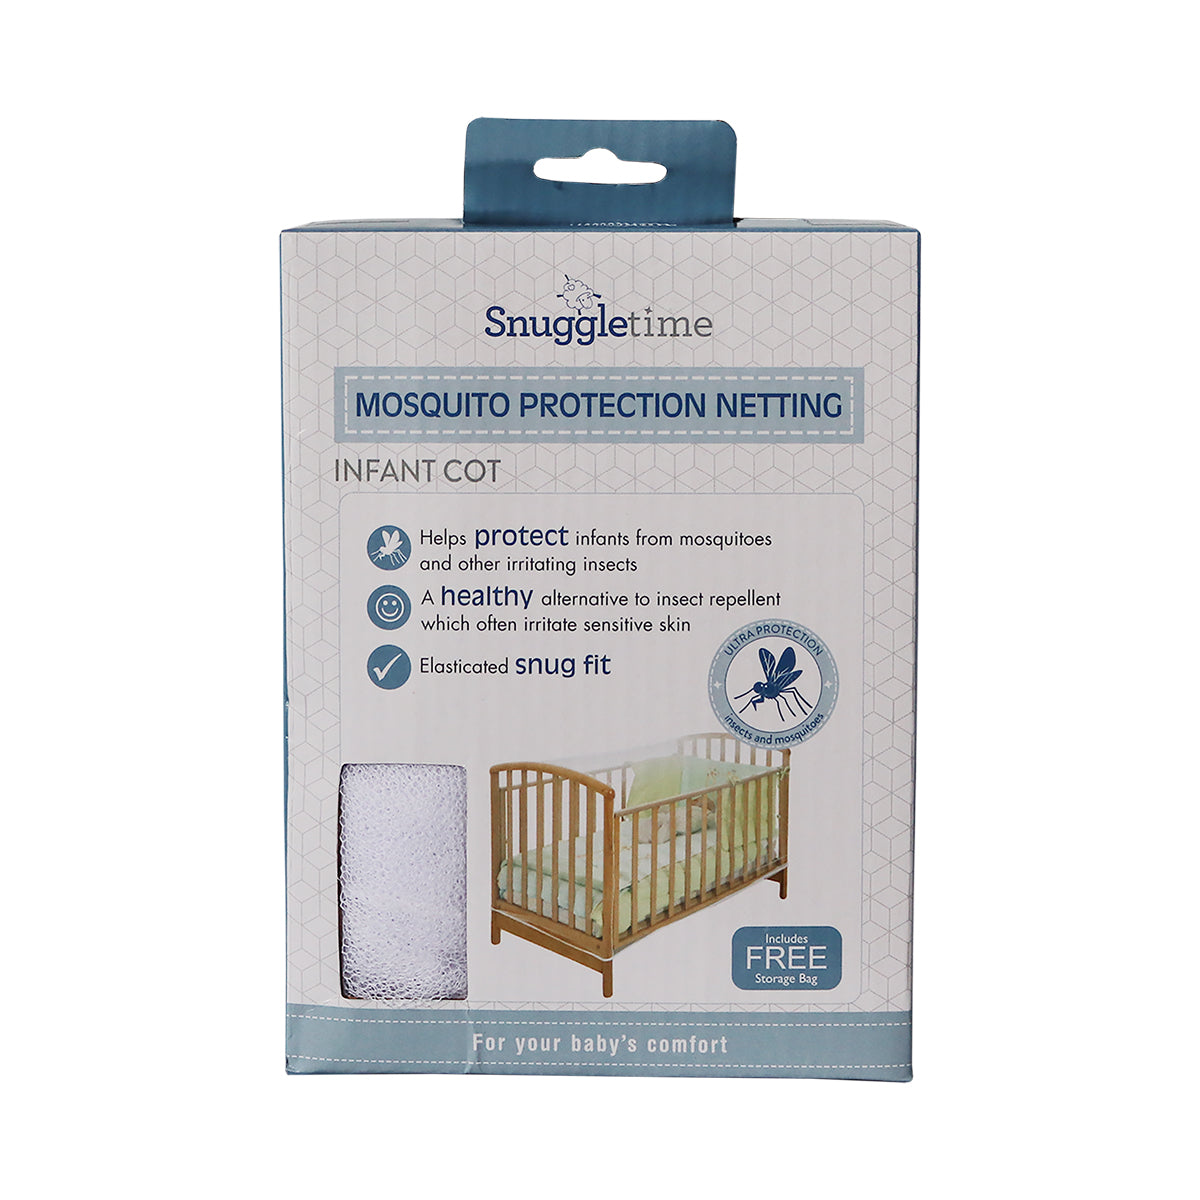 Snuggletime Mosquito Protection Netting